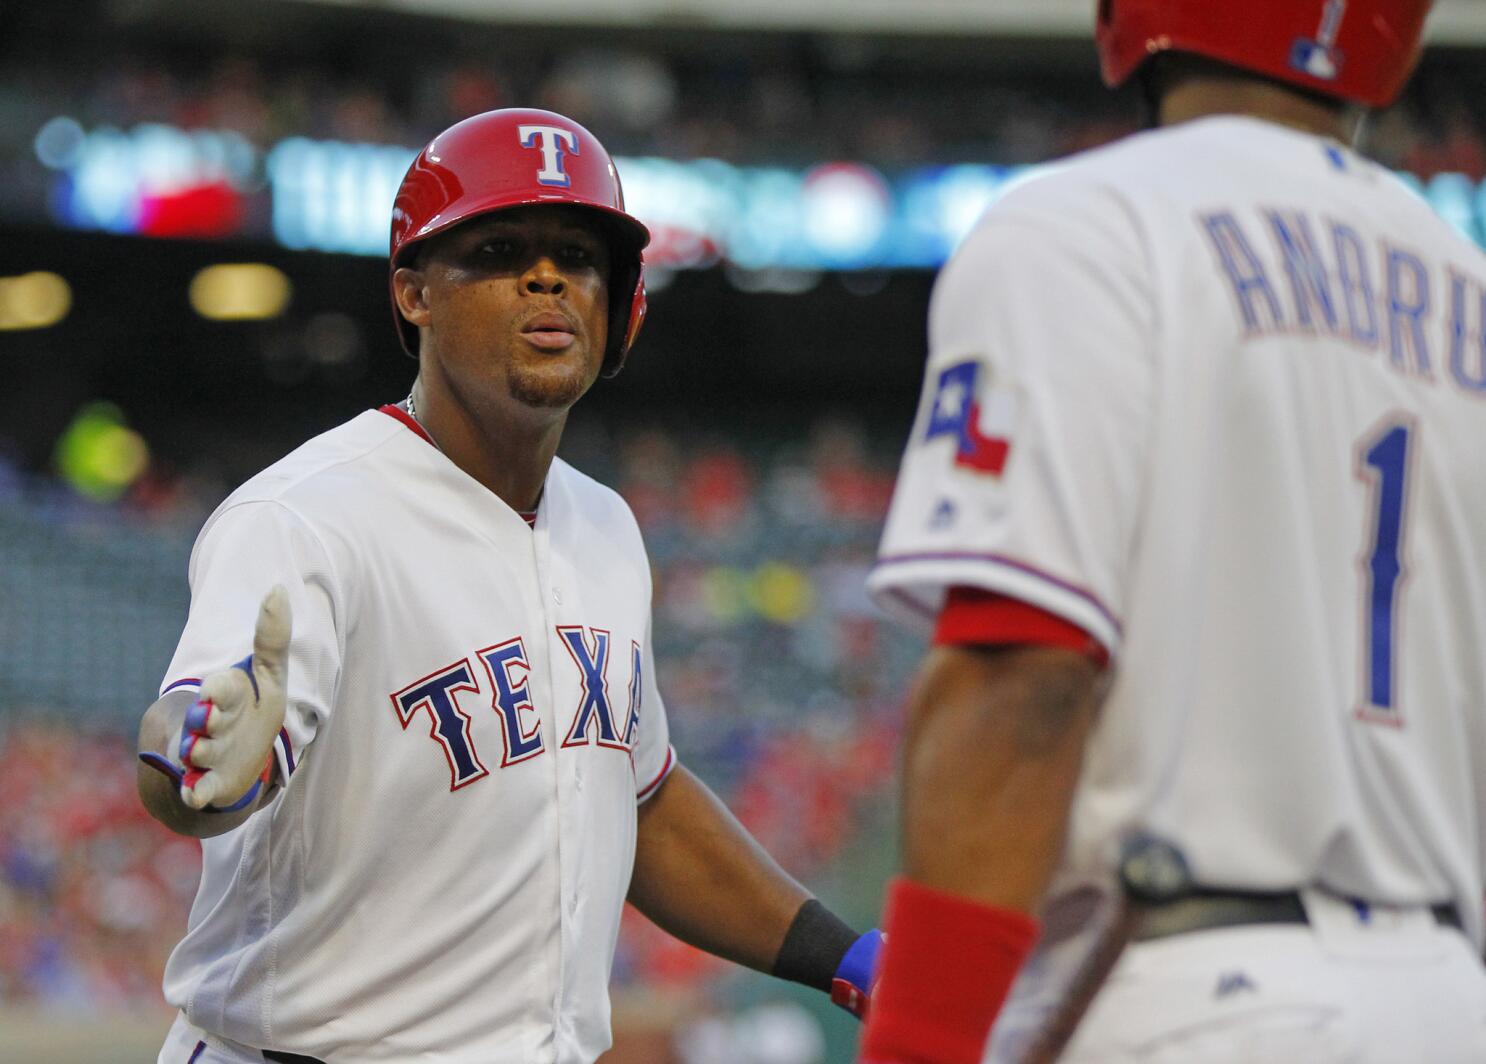 Just because Adrian Beltre reached 3,000 hits doesn't mean you can